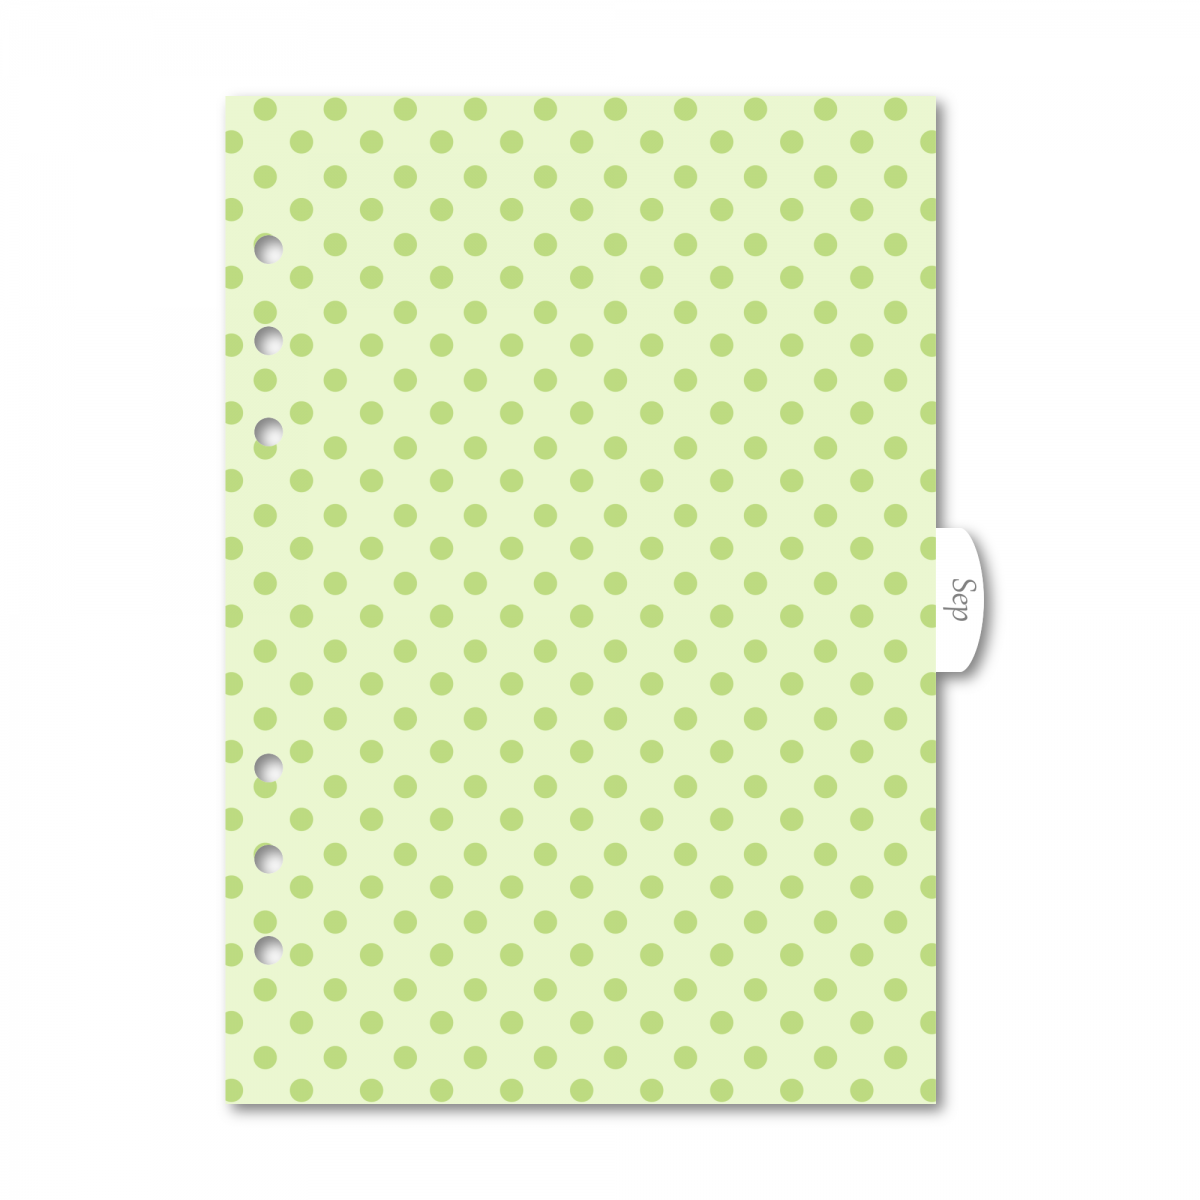 RINGBOUND 12 MONTHS PLASTIC DIVIDERS A5 (LARGE) - GARDEN